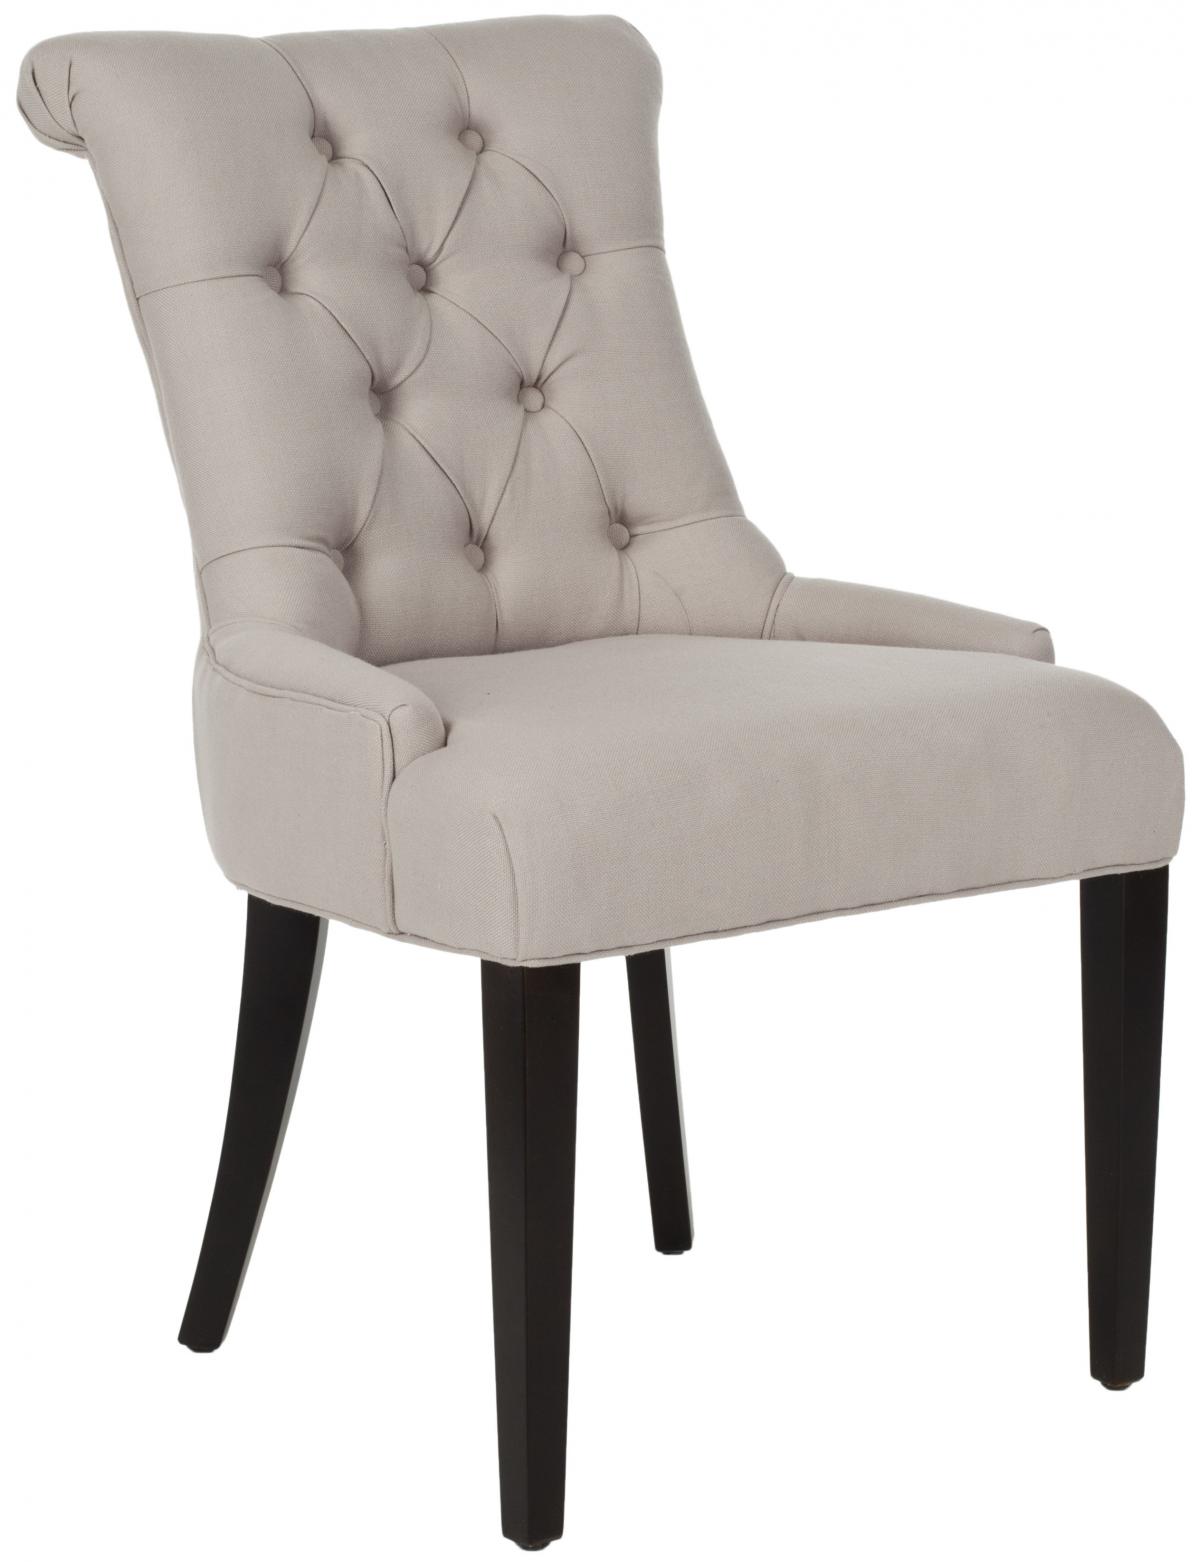 Safavieh - MCR4712B BOWIE SIDE CHAIRS - TAUPE (SET OF TWO)